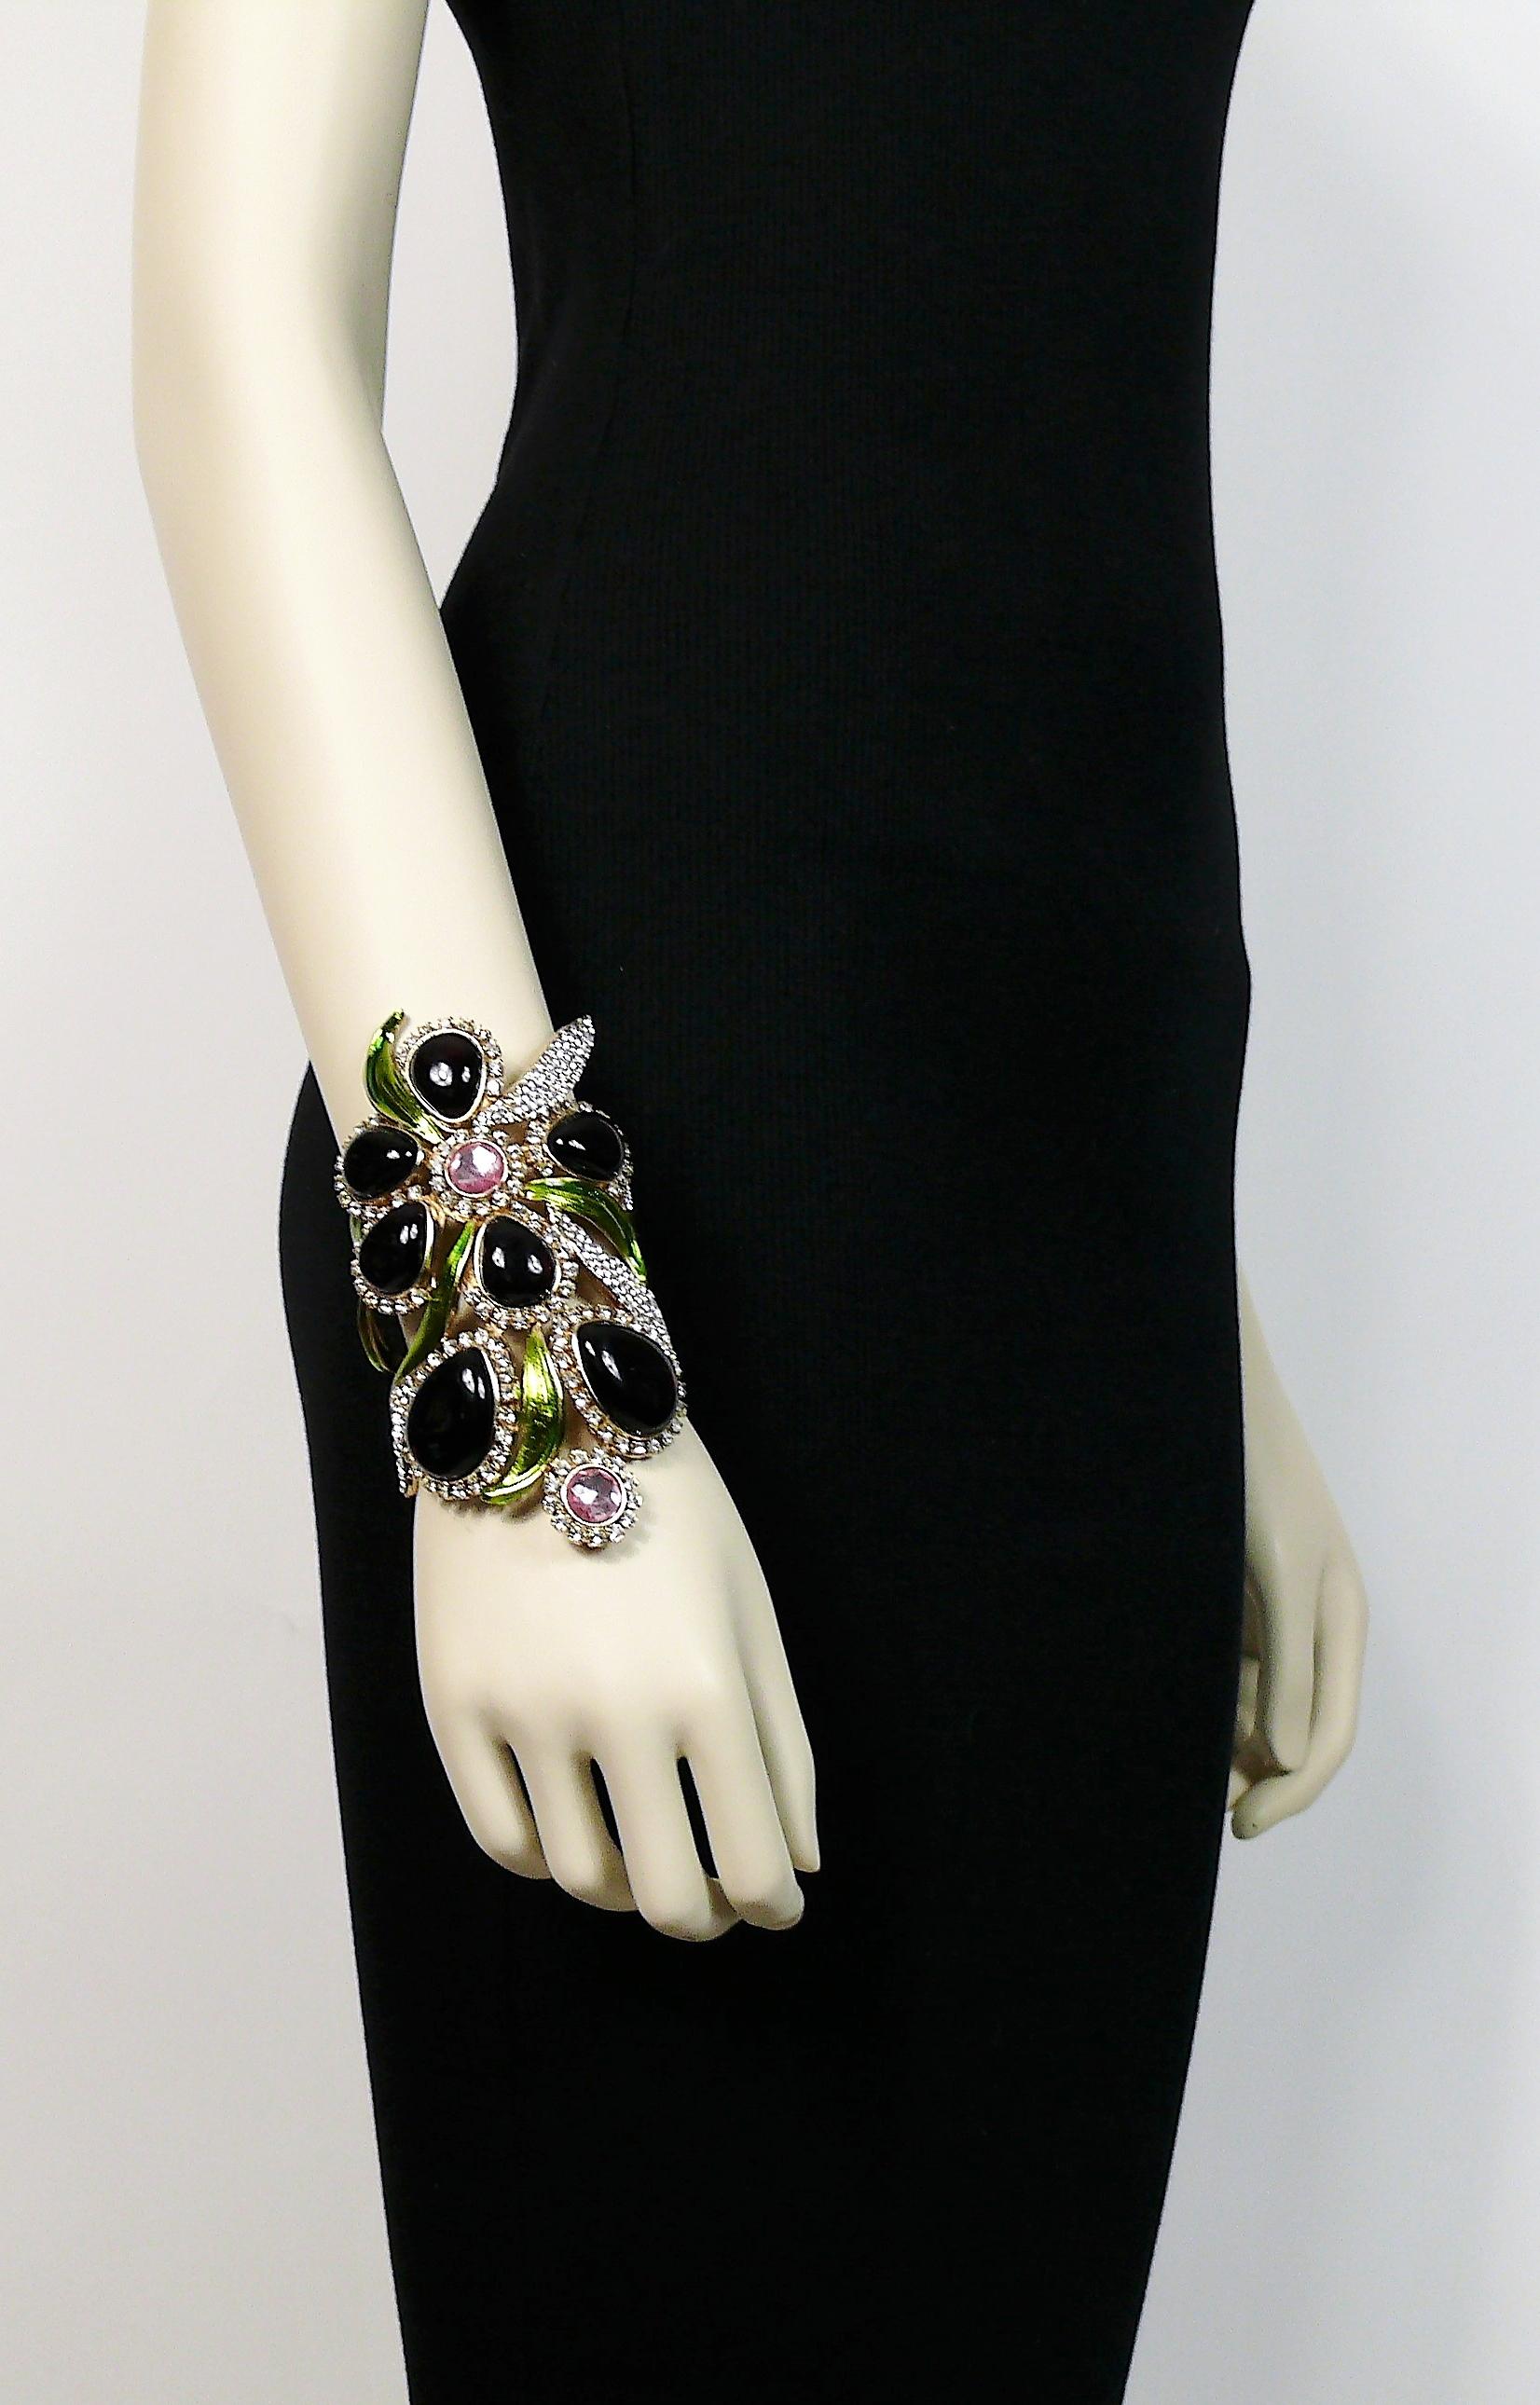 YVES SAINT LAURENT rare orchid cuff bracelet featuring deep purple glass cabochons, pink and clear crystals, green enameled leaves in a light gold toned setting.

Similar models on the Spring-Summer 2004 YVES SAINT LAURENT RTW runway show.

Embossed